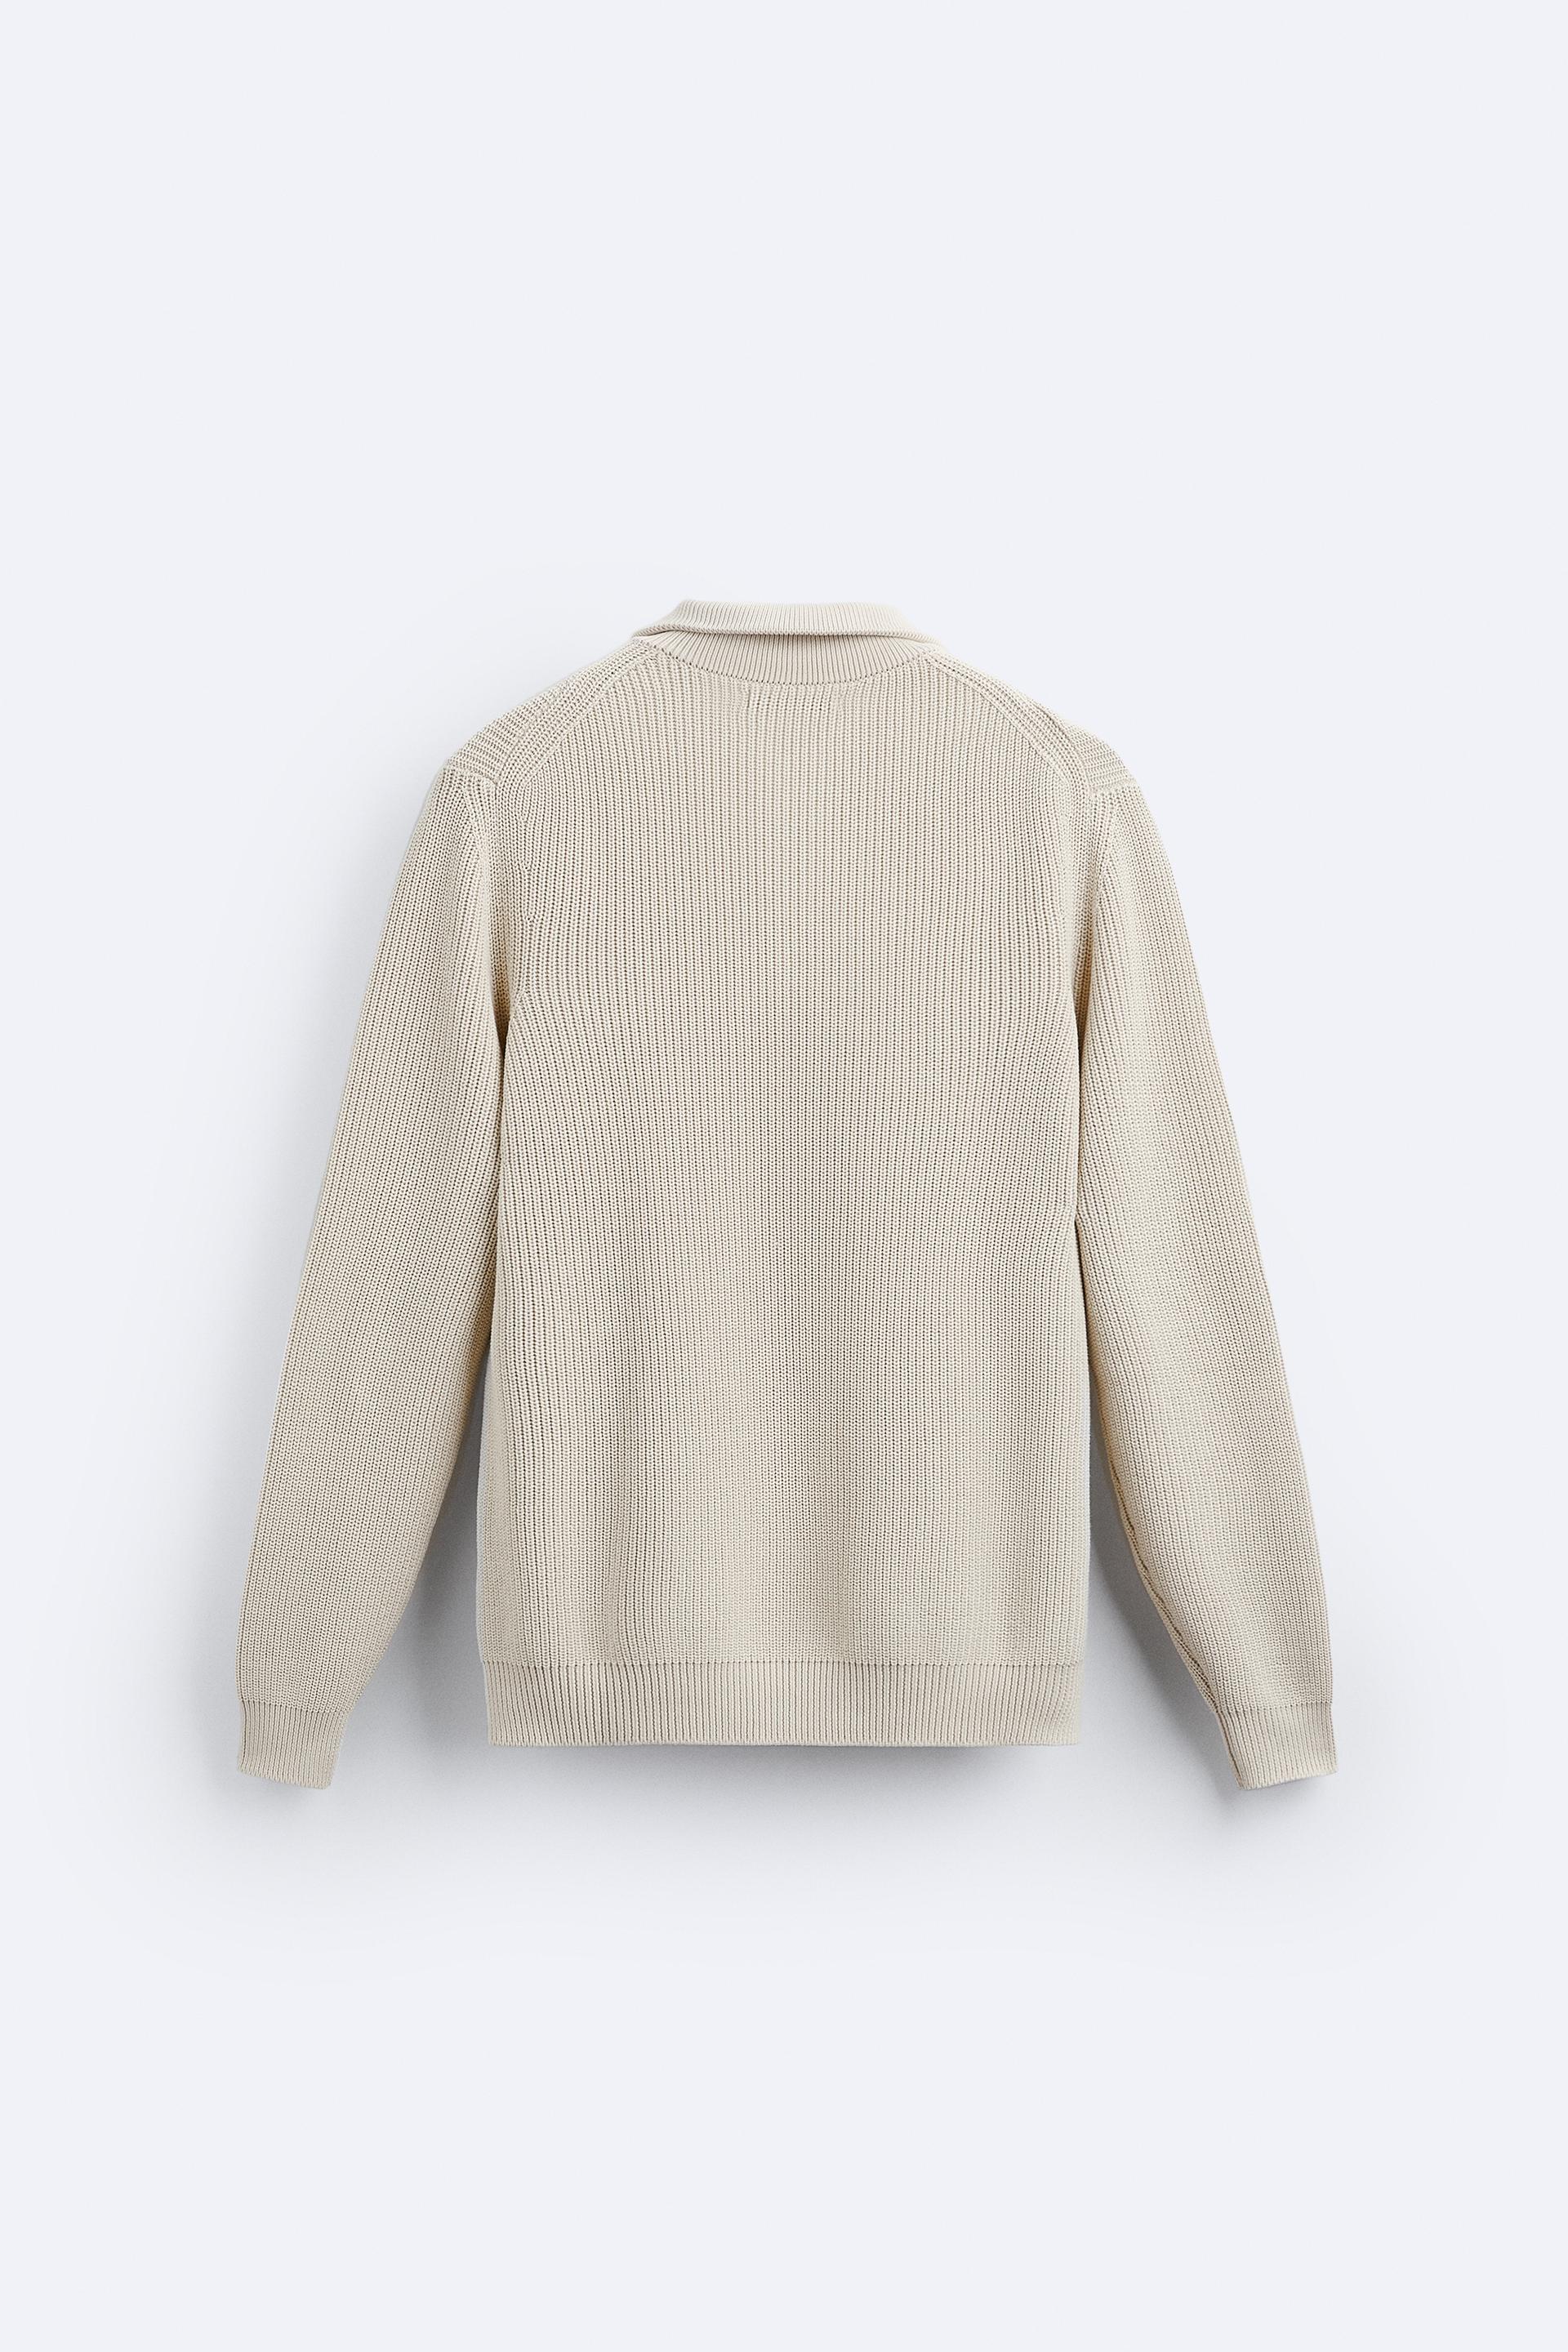 PURL KNIT SWEATER - Navy blue